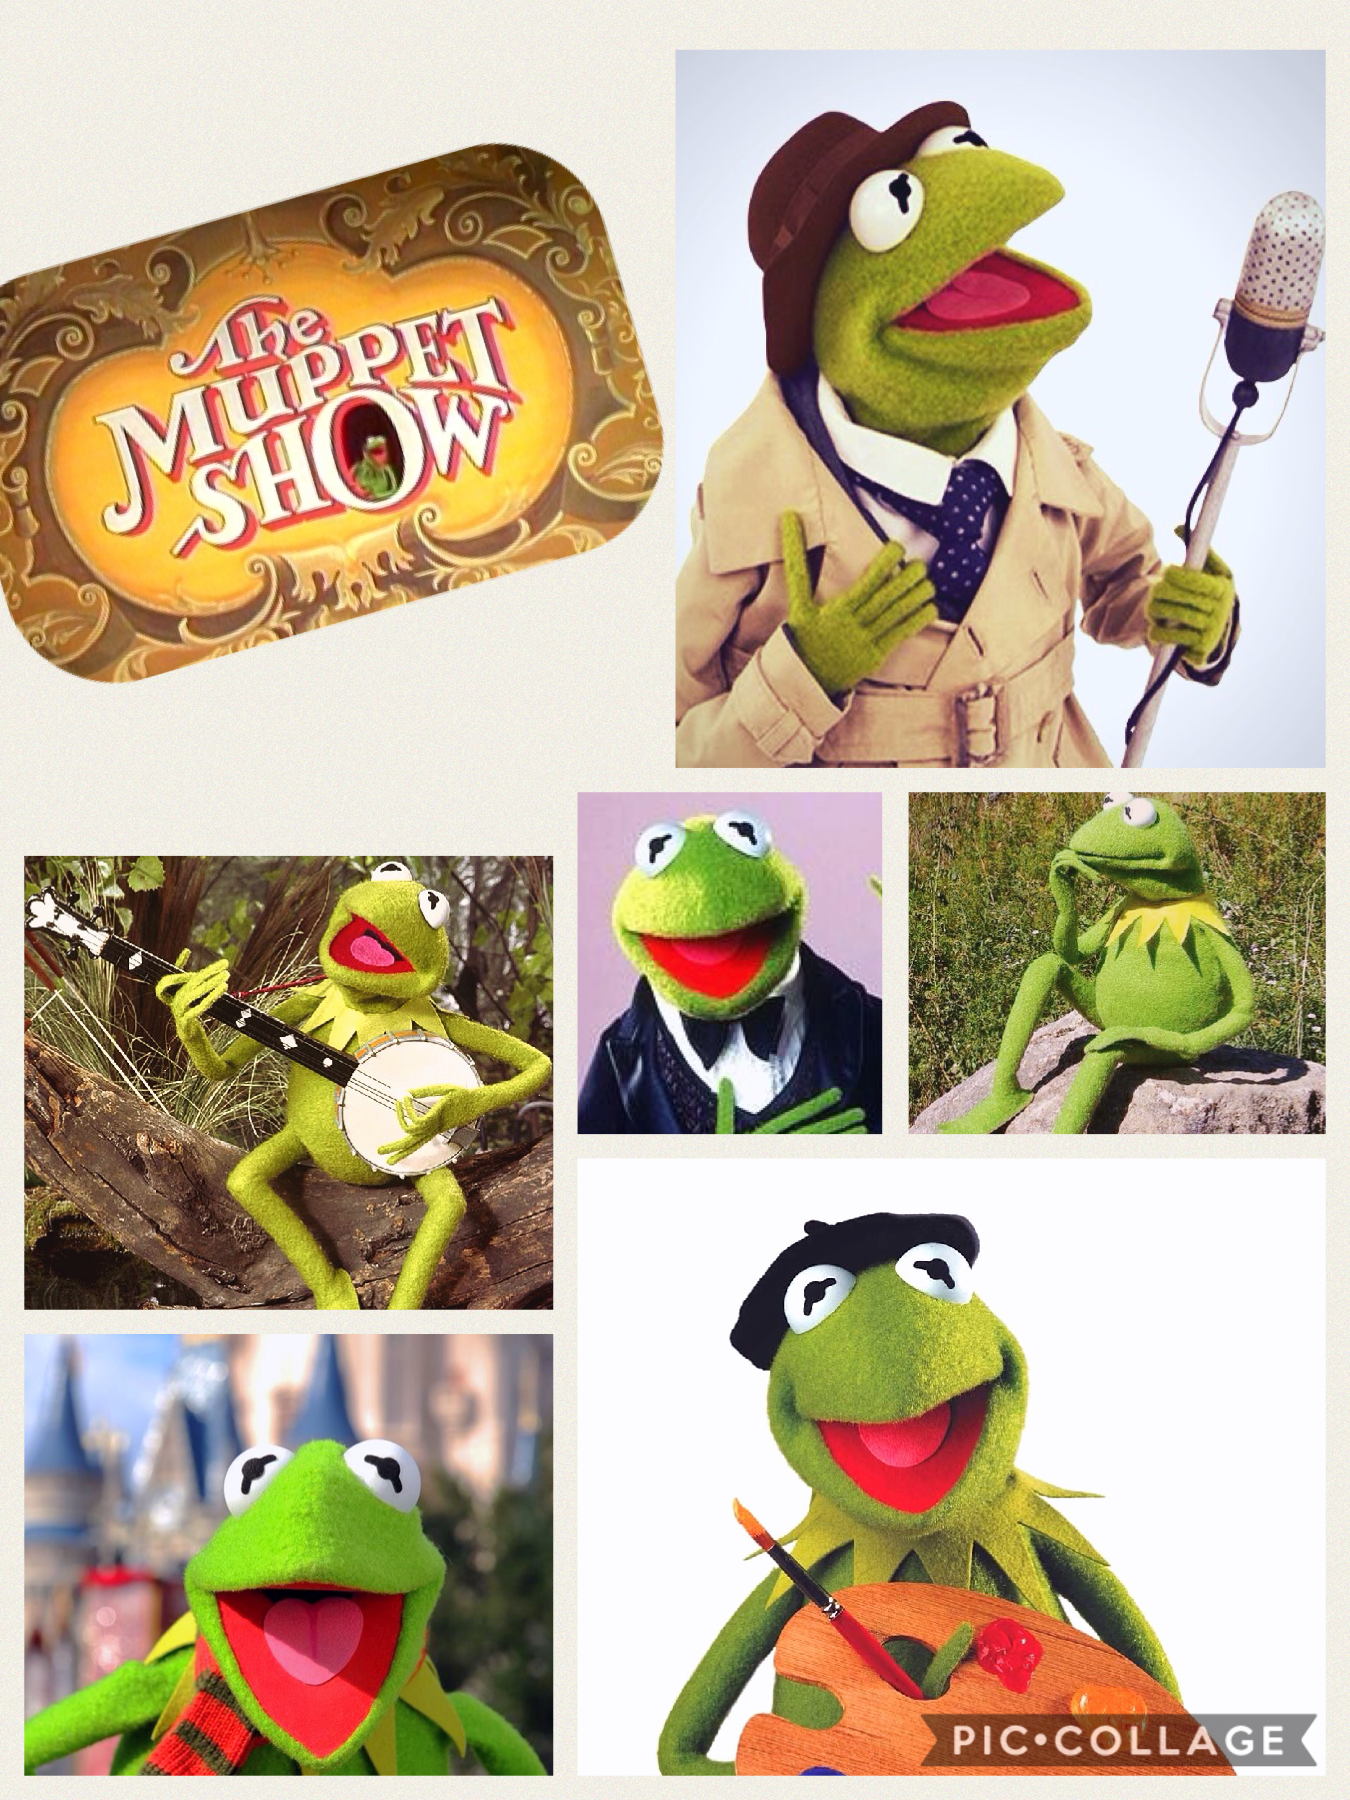 Kermit the Frog from The Muppets Show!